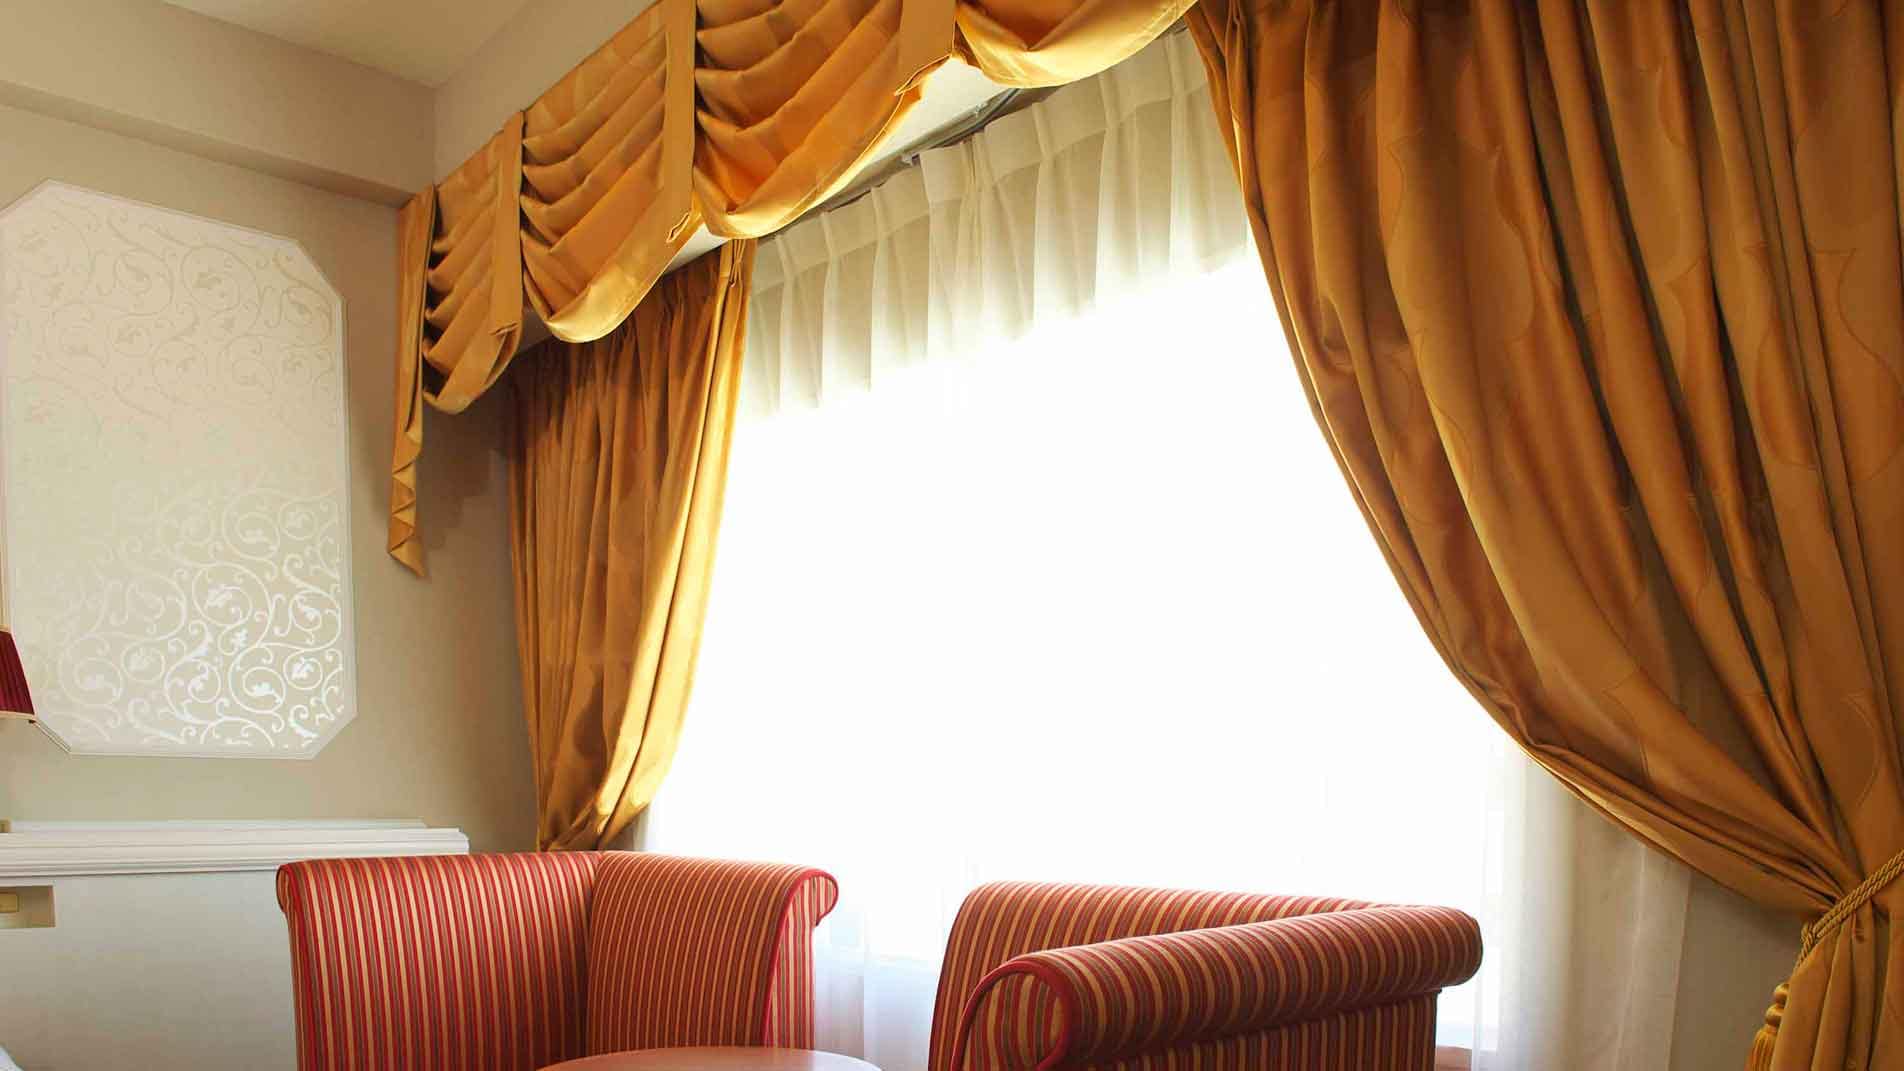 The windows of the moderate room (castle style) have drape curtains that look like a castle.